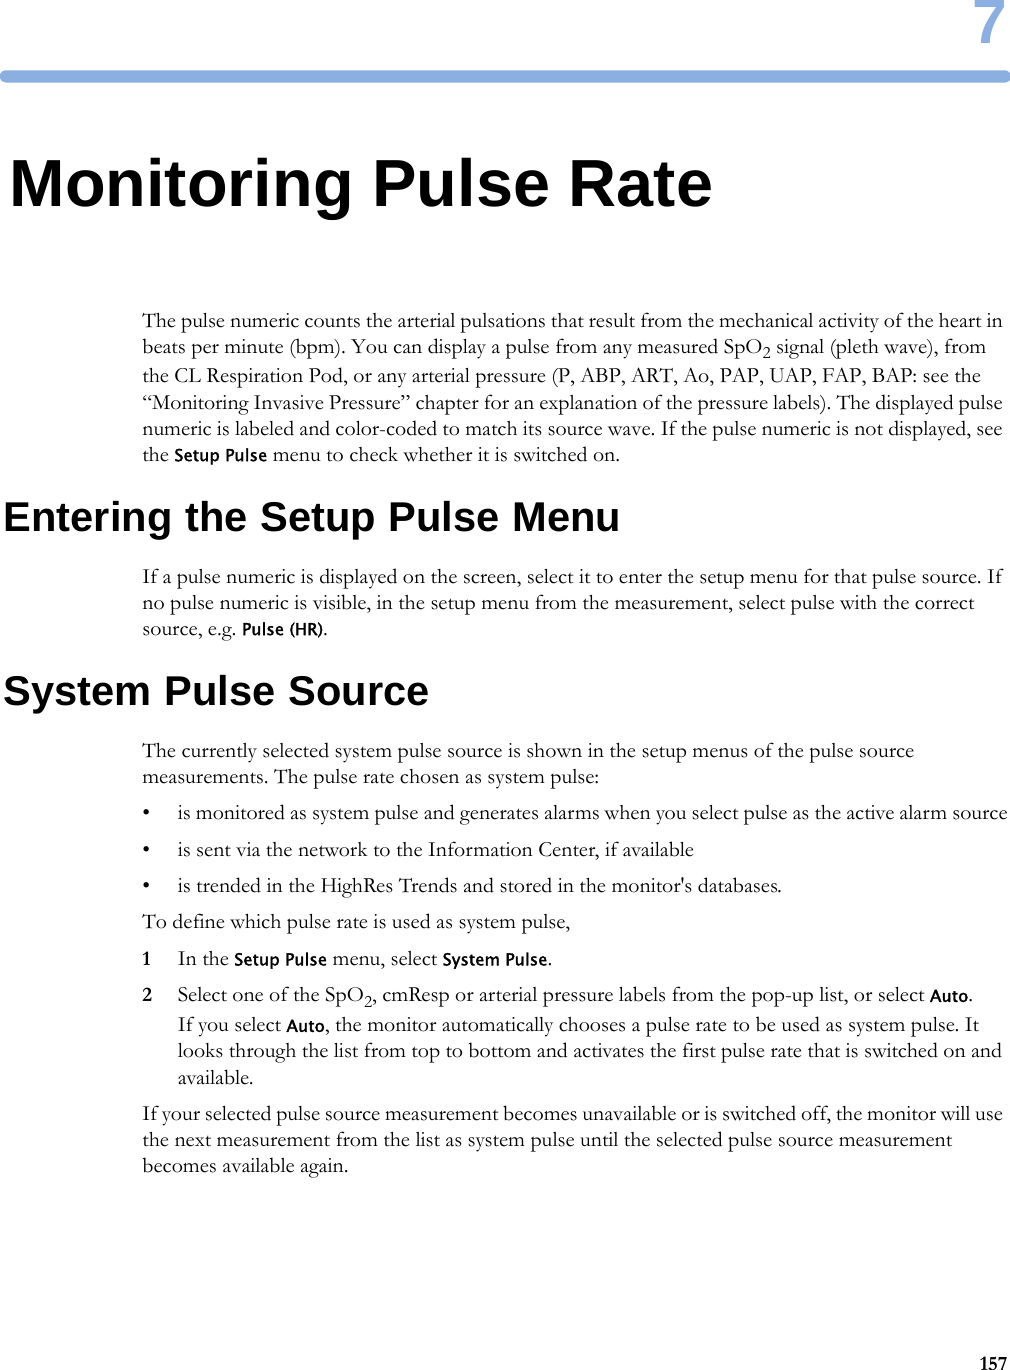 71577Monitoring Pulse RateThe pulse numeric counts the arterial pulsations that result from the mechanical activity of the heart in beats per minute (bpm). You can display a pulse from any measured SpO2 signal (pleth wave), from the CL Respiration Pod, or any arterial pressure (P, ABP, ART, Ao, PAP, UAP, FAP, BAP: see the “Monitoring Invasive Pressure” chapter for an explanation of the pressure labels). The displayed pulse numeric is labeled and color-coded to match its source wave. If the pulse numeric is not displayed, see the Setup Pulse menu to check whether it is switched on.Entering the Setup Pulse MenuIf a pulse numeric is displayed on the screen, select it to enter the setup menu for that pulse source. If no pulse numeric is visible, in the setup menu from the measurement, select pulse with the correct source, e.g. Pulse (HR).System Pulse SourceThe currently selected system pulse source is shown in the setup menus of the pulse source measurements. The pulse rate chosen as system pulse:• is monitored as system pulse and generates alarms when you select pulse as the active alarm source• is sent via the network to the Information Center, if available• is trended in the HighRes Trends and stored in the monitor&apos;s databases.To define which pulse rate is used as system pulse,1In the Setup Pulse menu, select System Pulse.2Select one of the SpO2, cmResp or arterial pressure labels from the pop-up list, or select Auto.If you select Auto, the monitor automatically chooses a pulse rate to be used as system pulse. It looks through the list from top to bottom and activates the first pulse rate that is switched on and available.If your selected pulse source measurement becomes unavailable or is switched off, the monitor will use the next measurement from the list as system pulse until the selected pulse source measurement becomes available again.